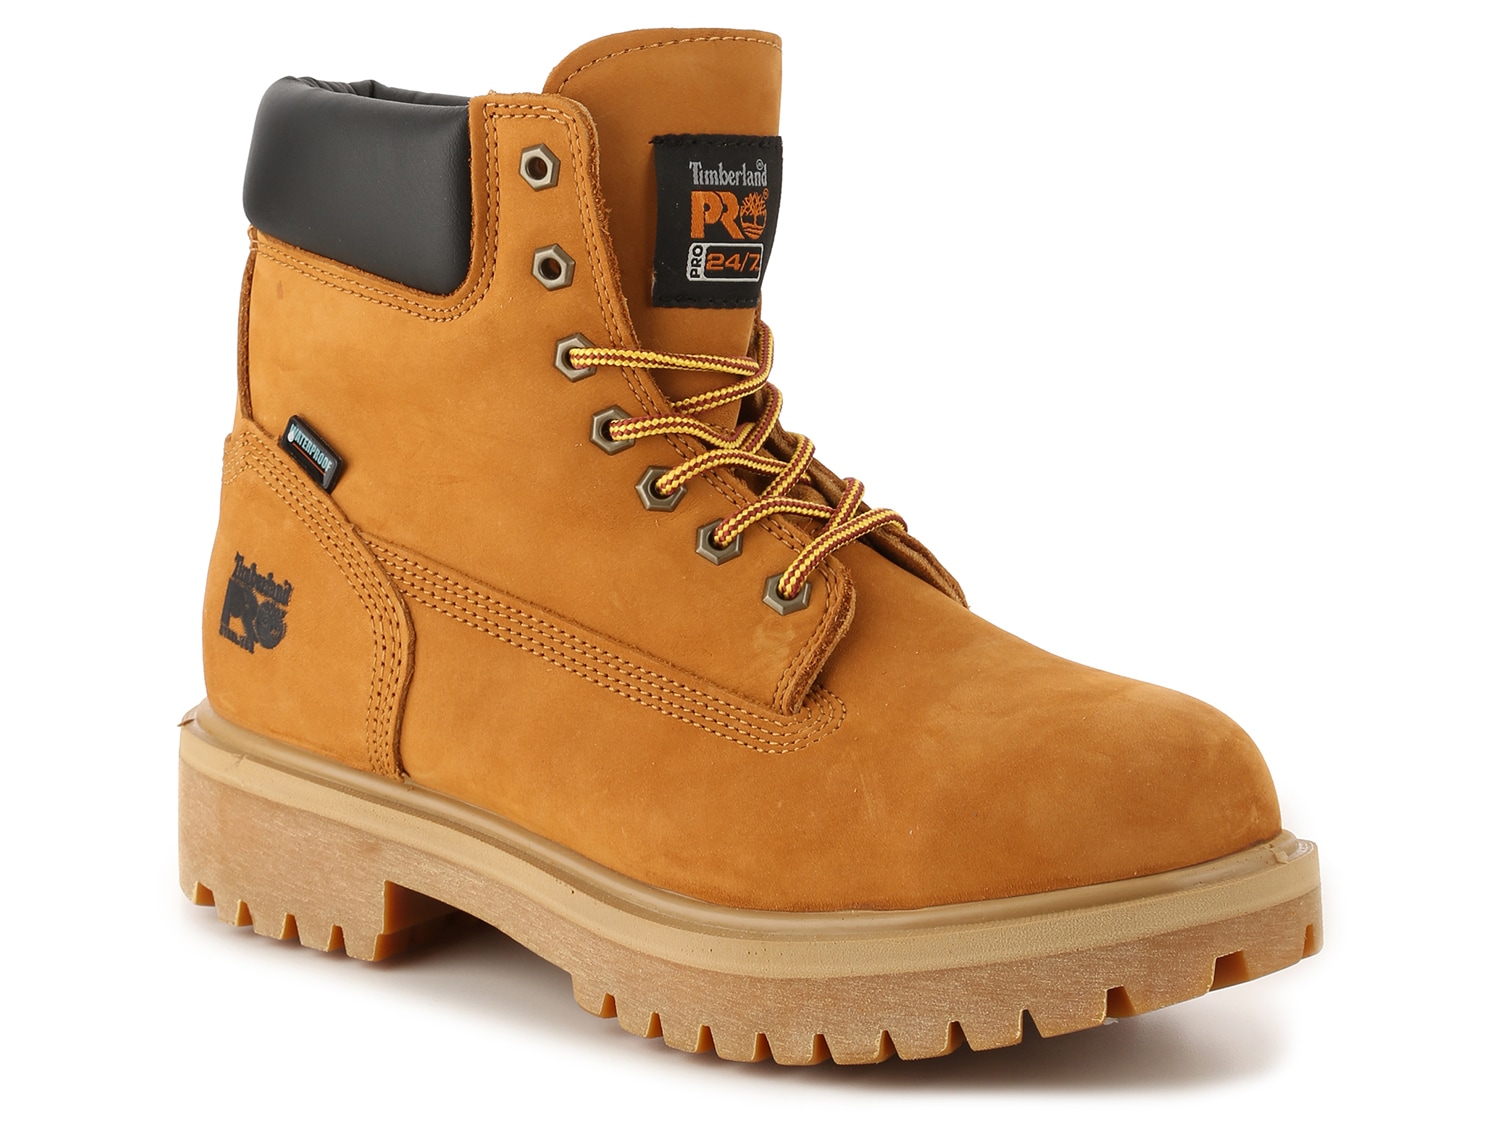 Timberland PRO PRO Direct Attach Steel Toe Work Boot Men's - Free Shipping DSW